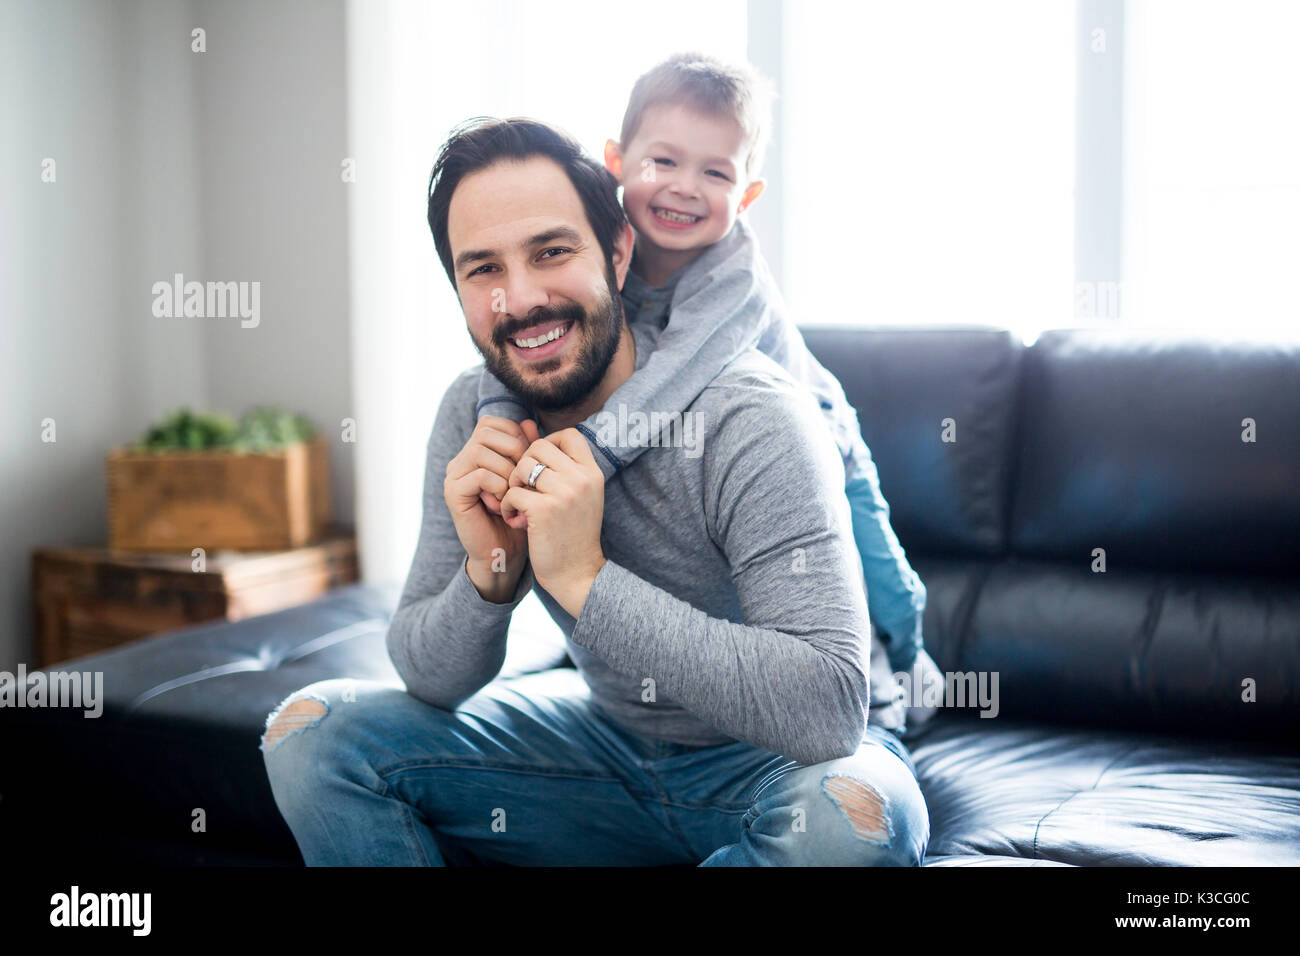 Father And Children On Sofa At Home Watching TV Together Stock Photo